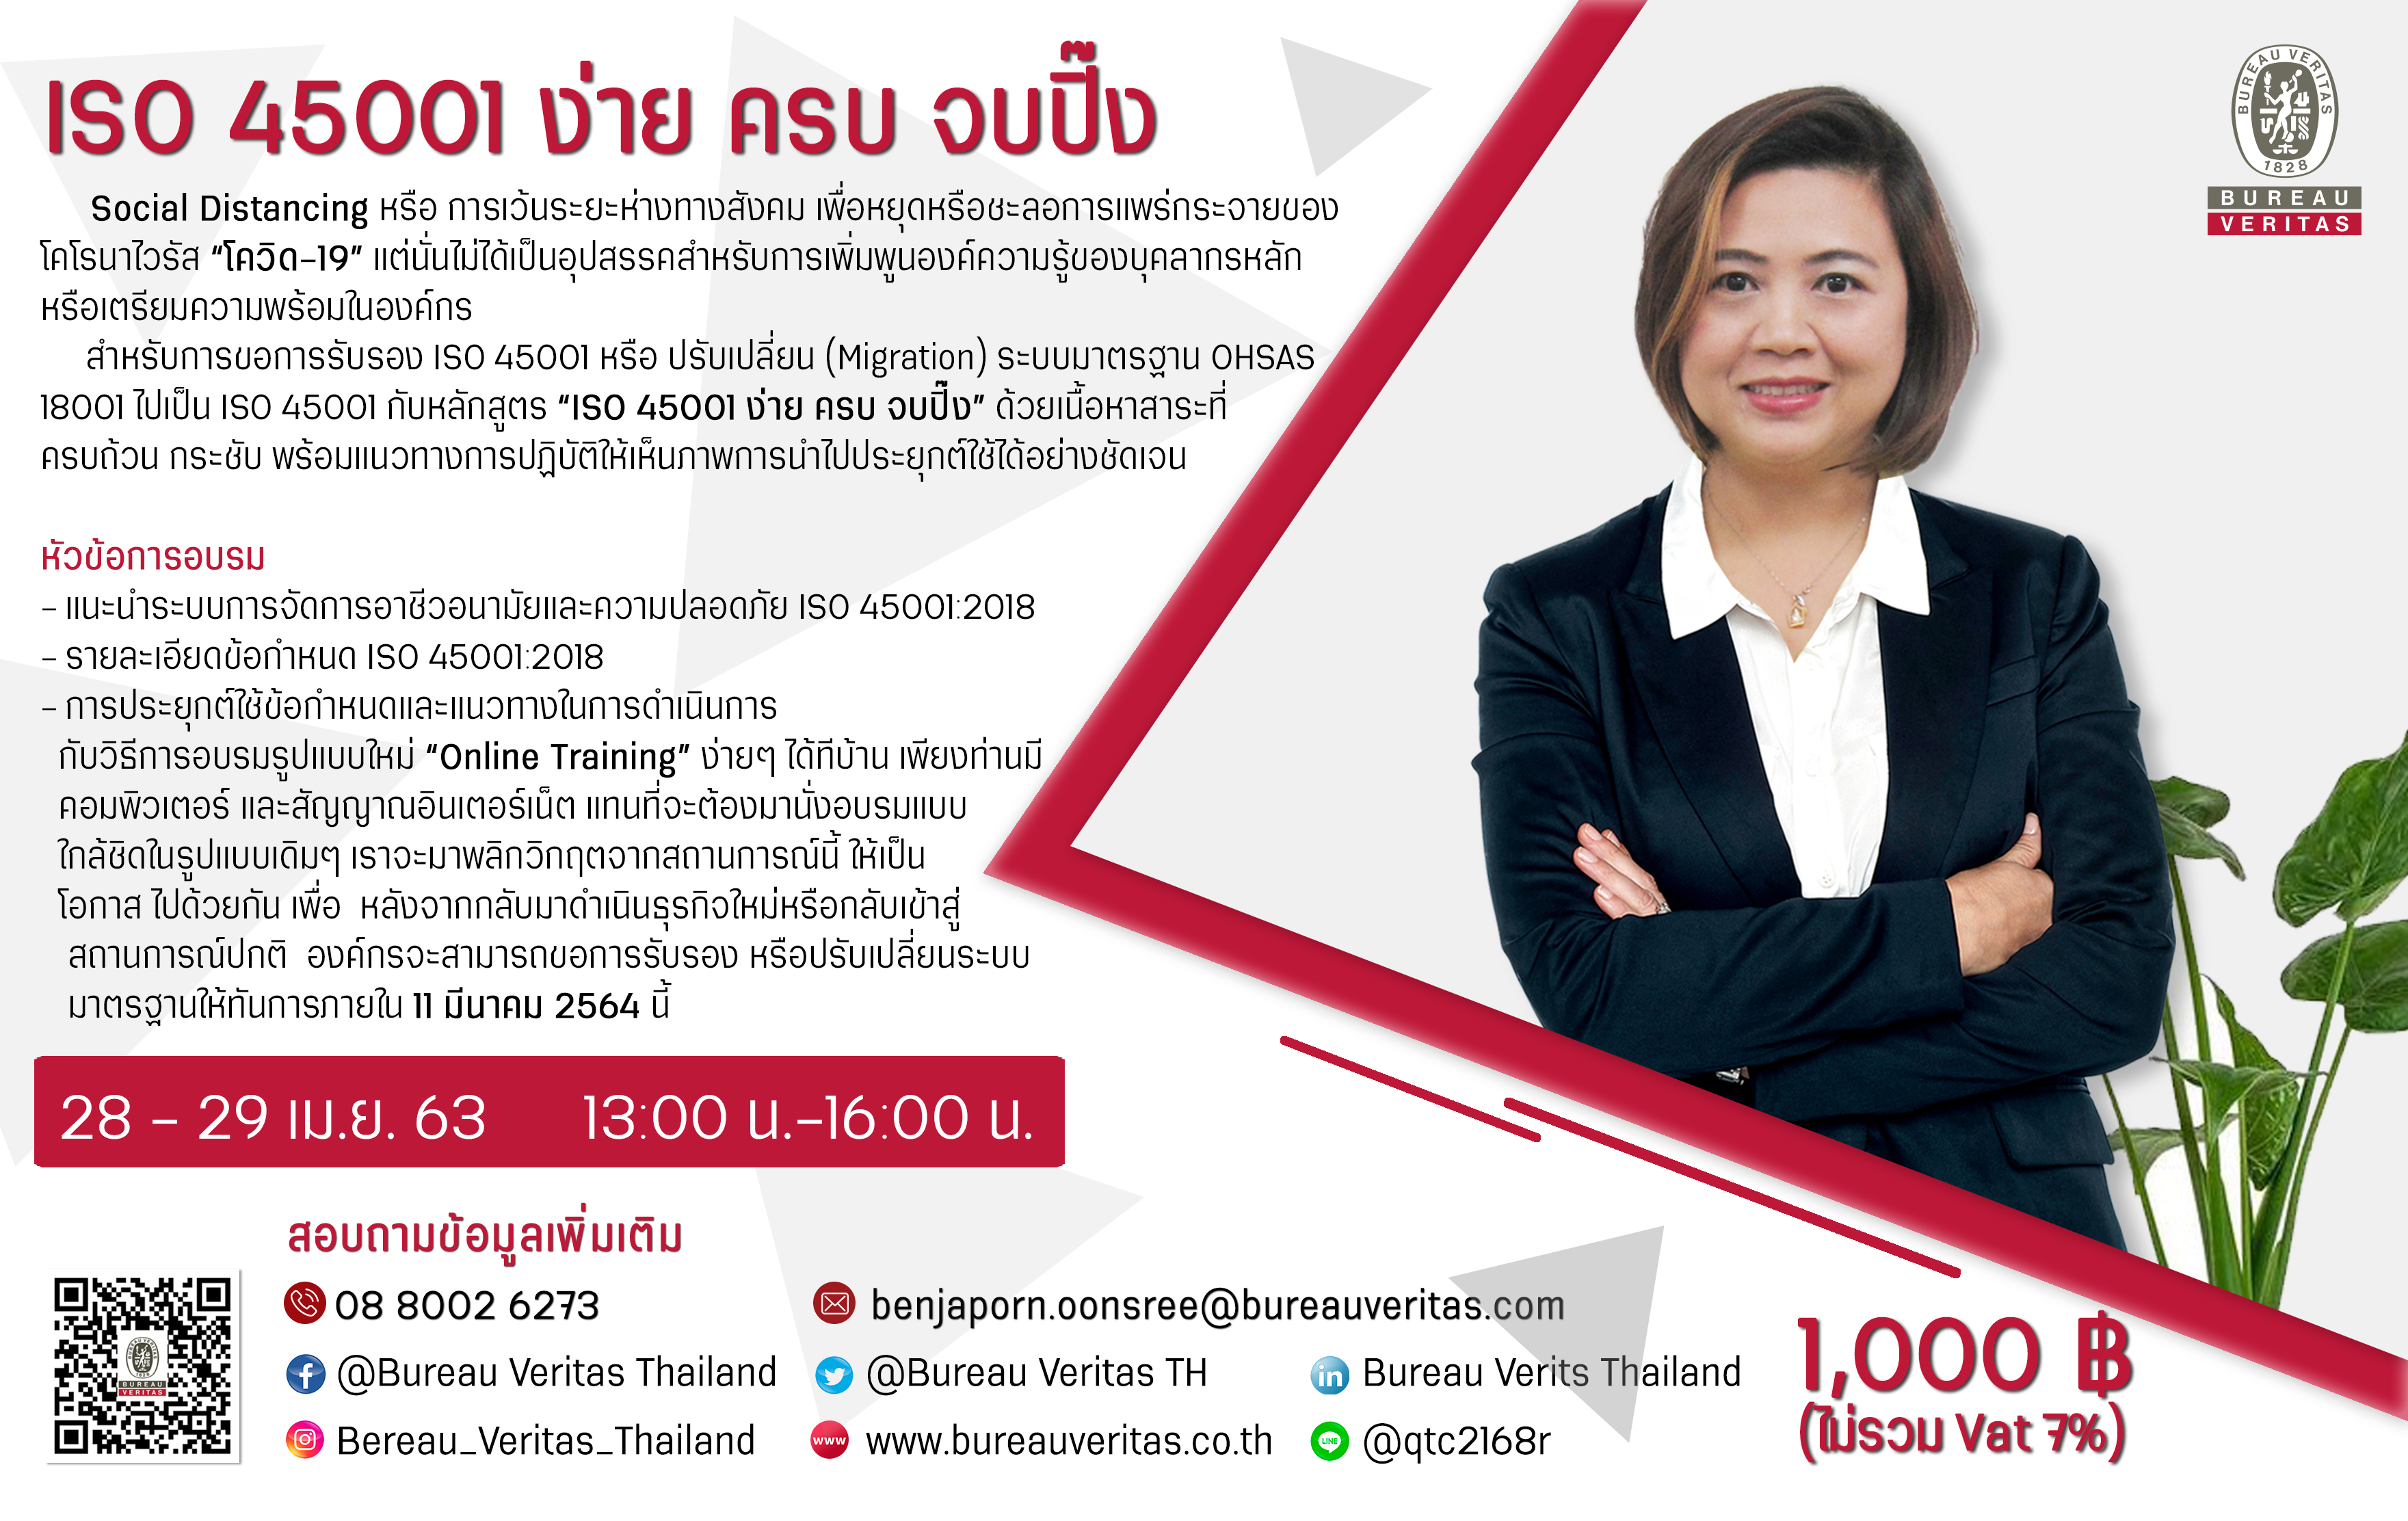 ISO 45001, easy and all in one. 28-29th April 2020, 13.00-16.00